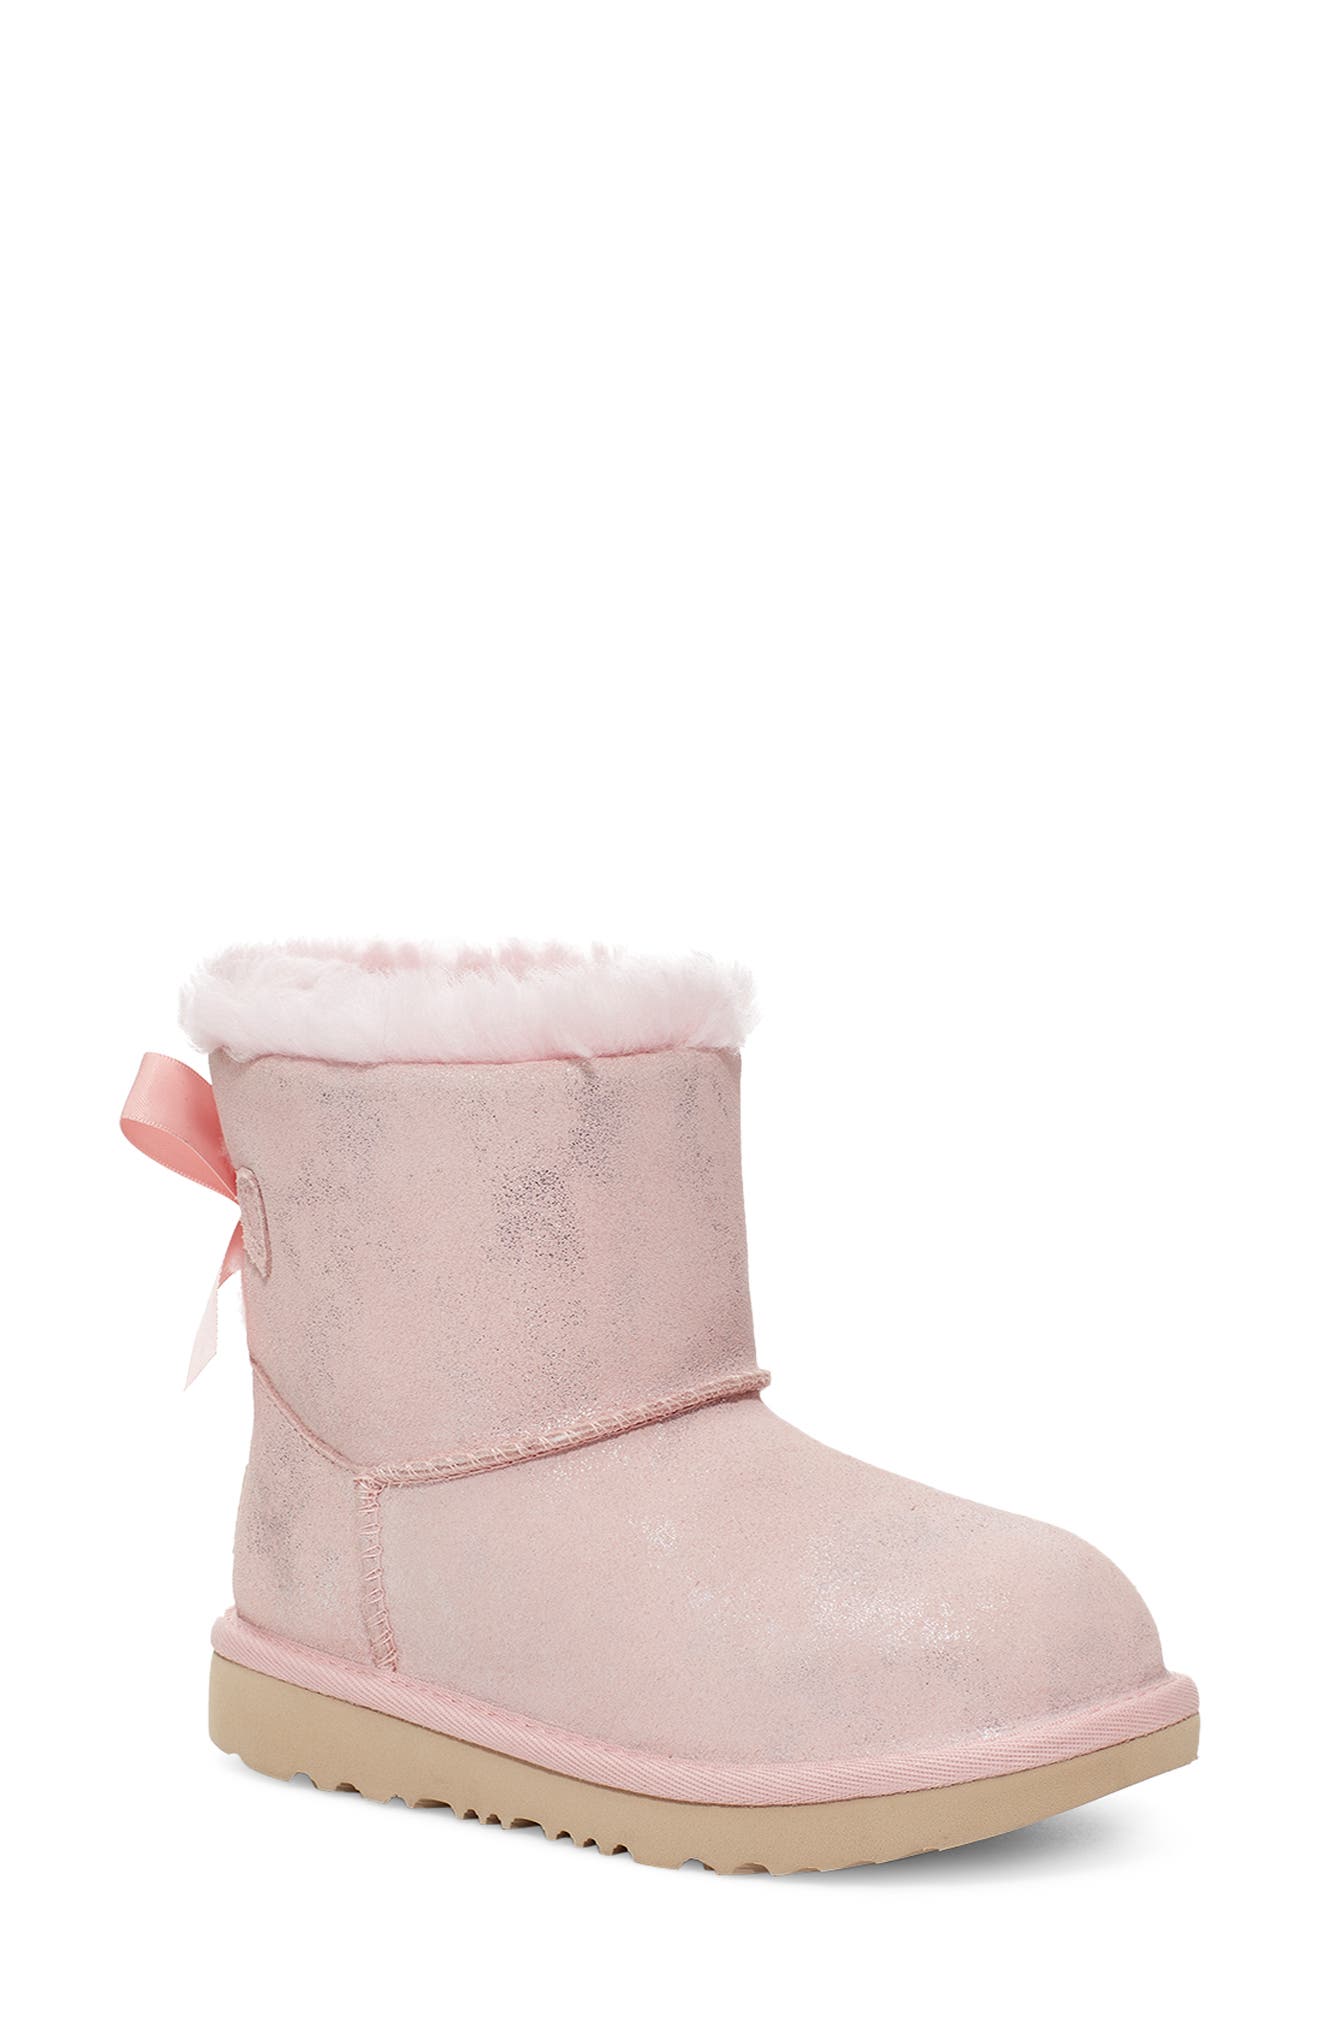 pink toddler uggs with bows